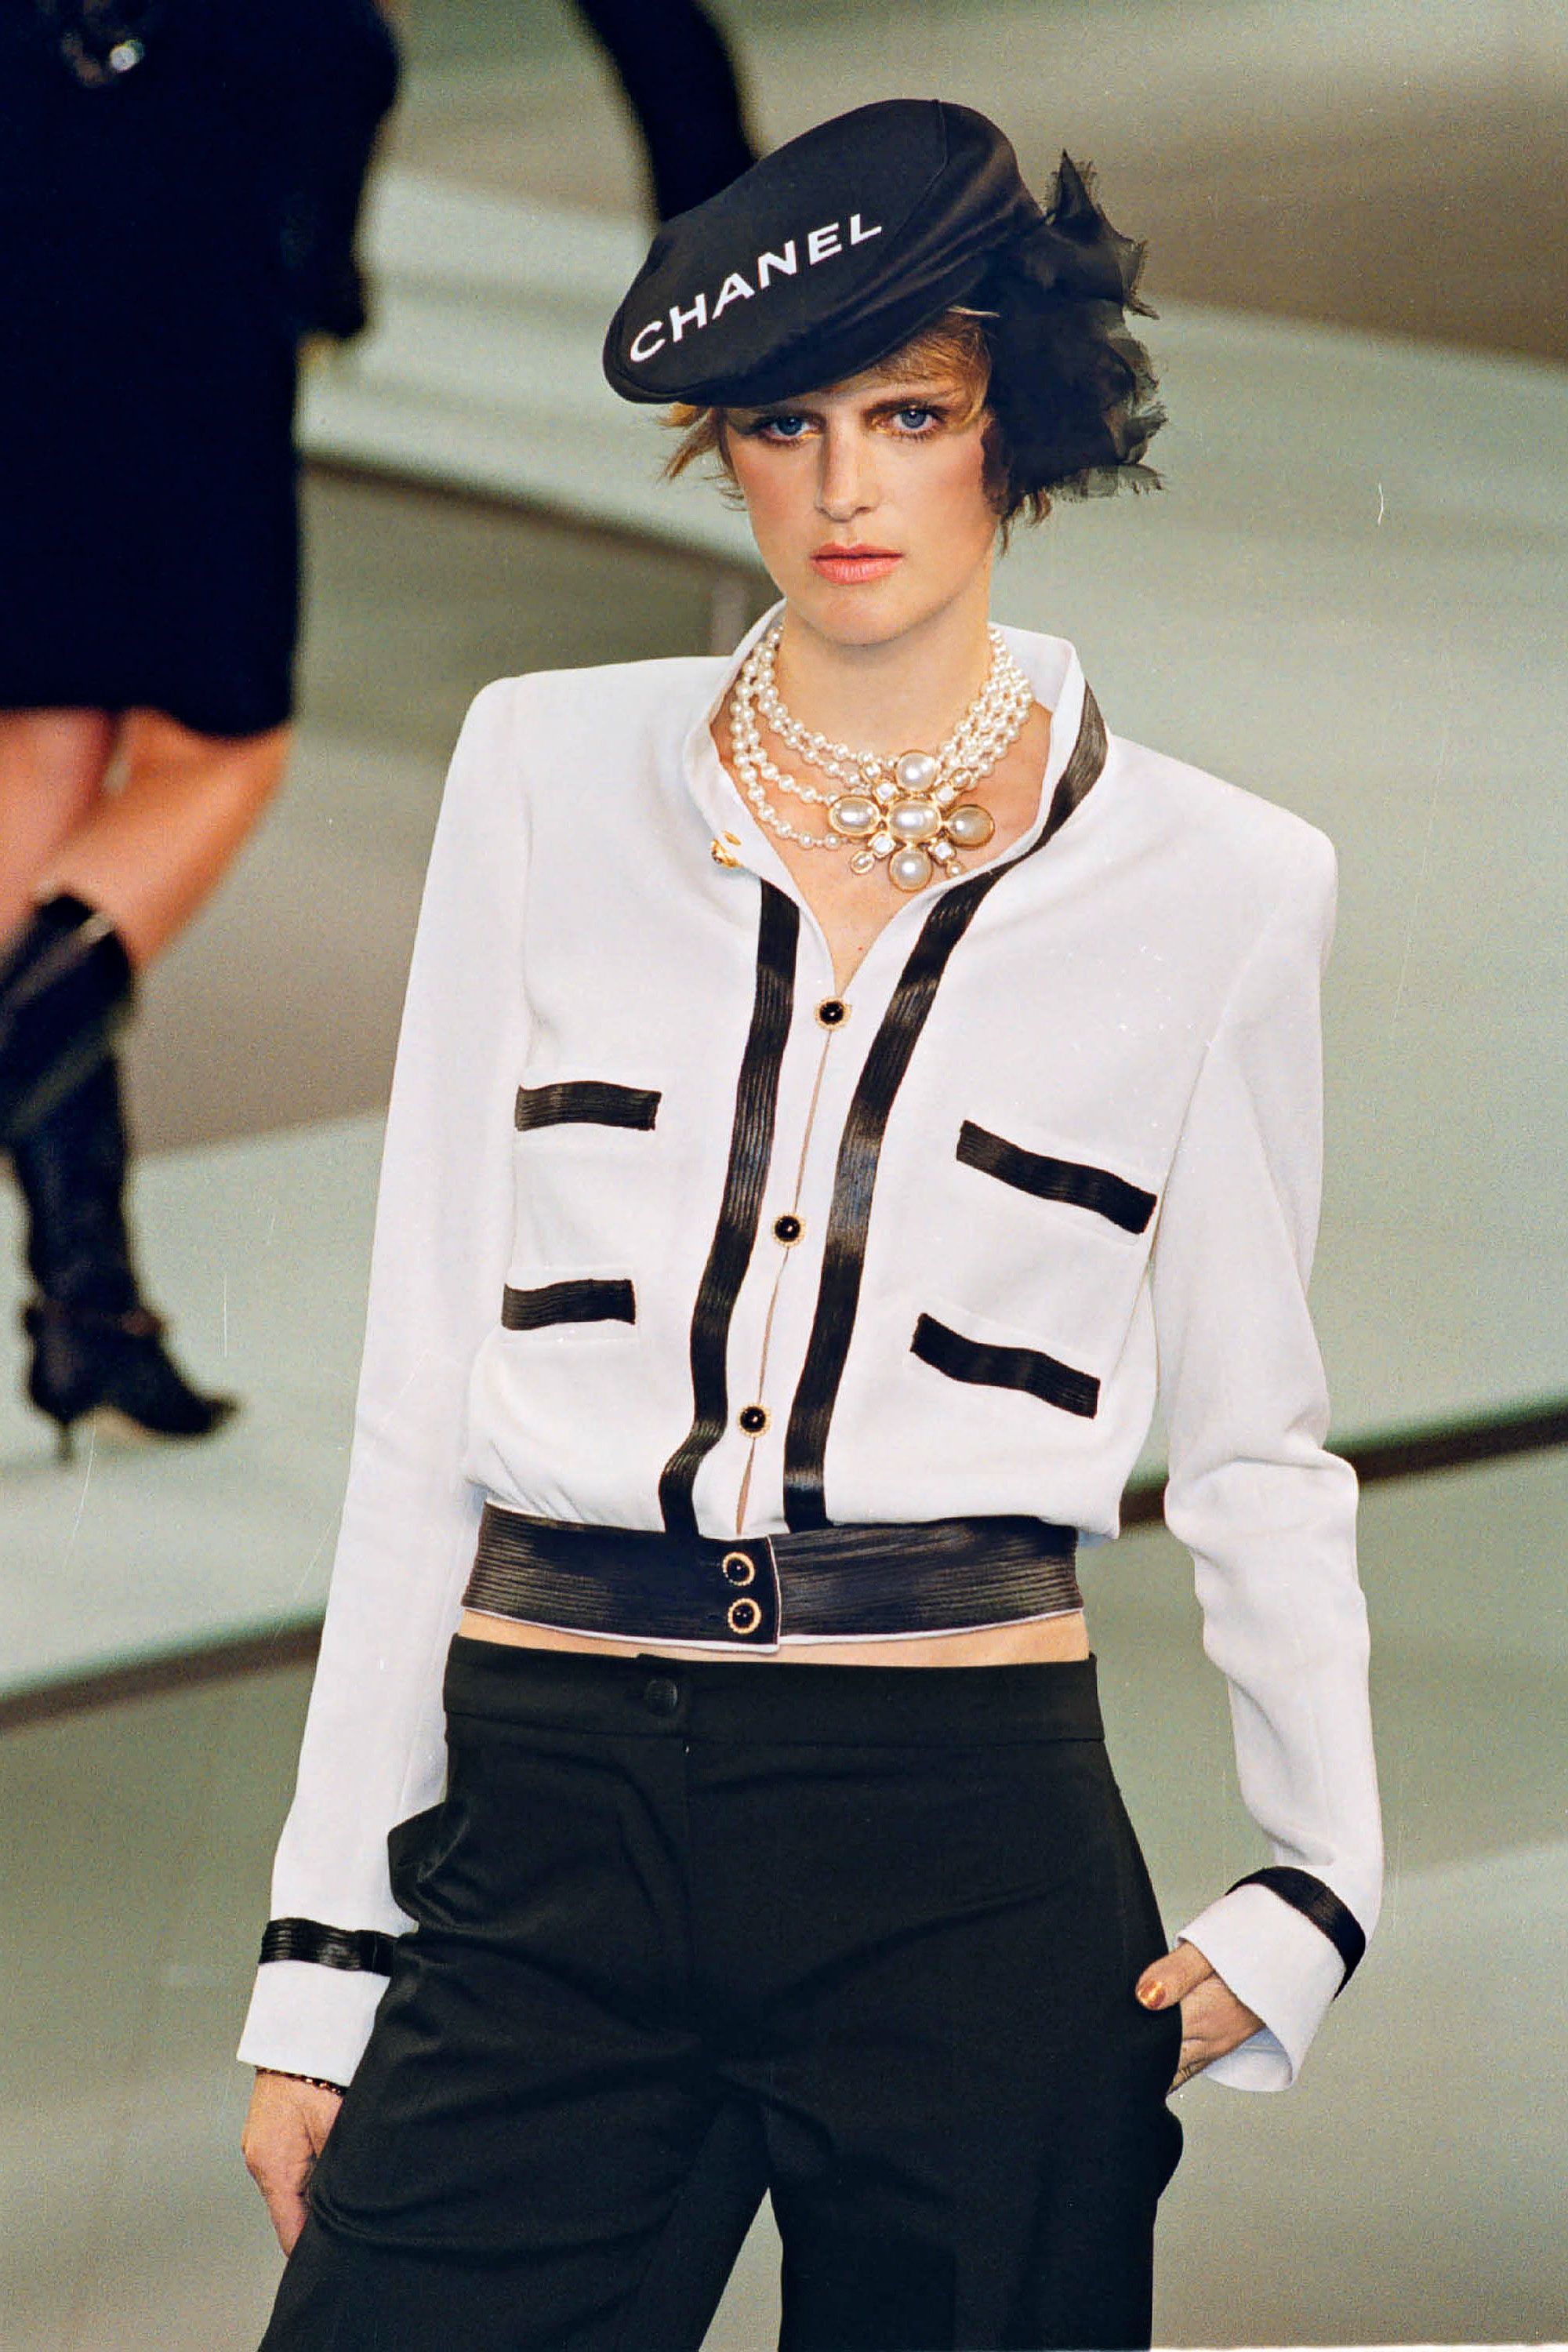 Coco Chanel Runway | vlr.eng.br